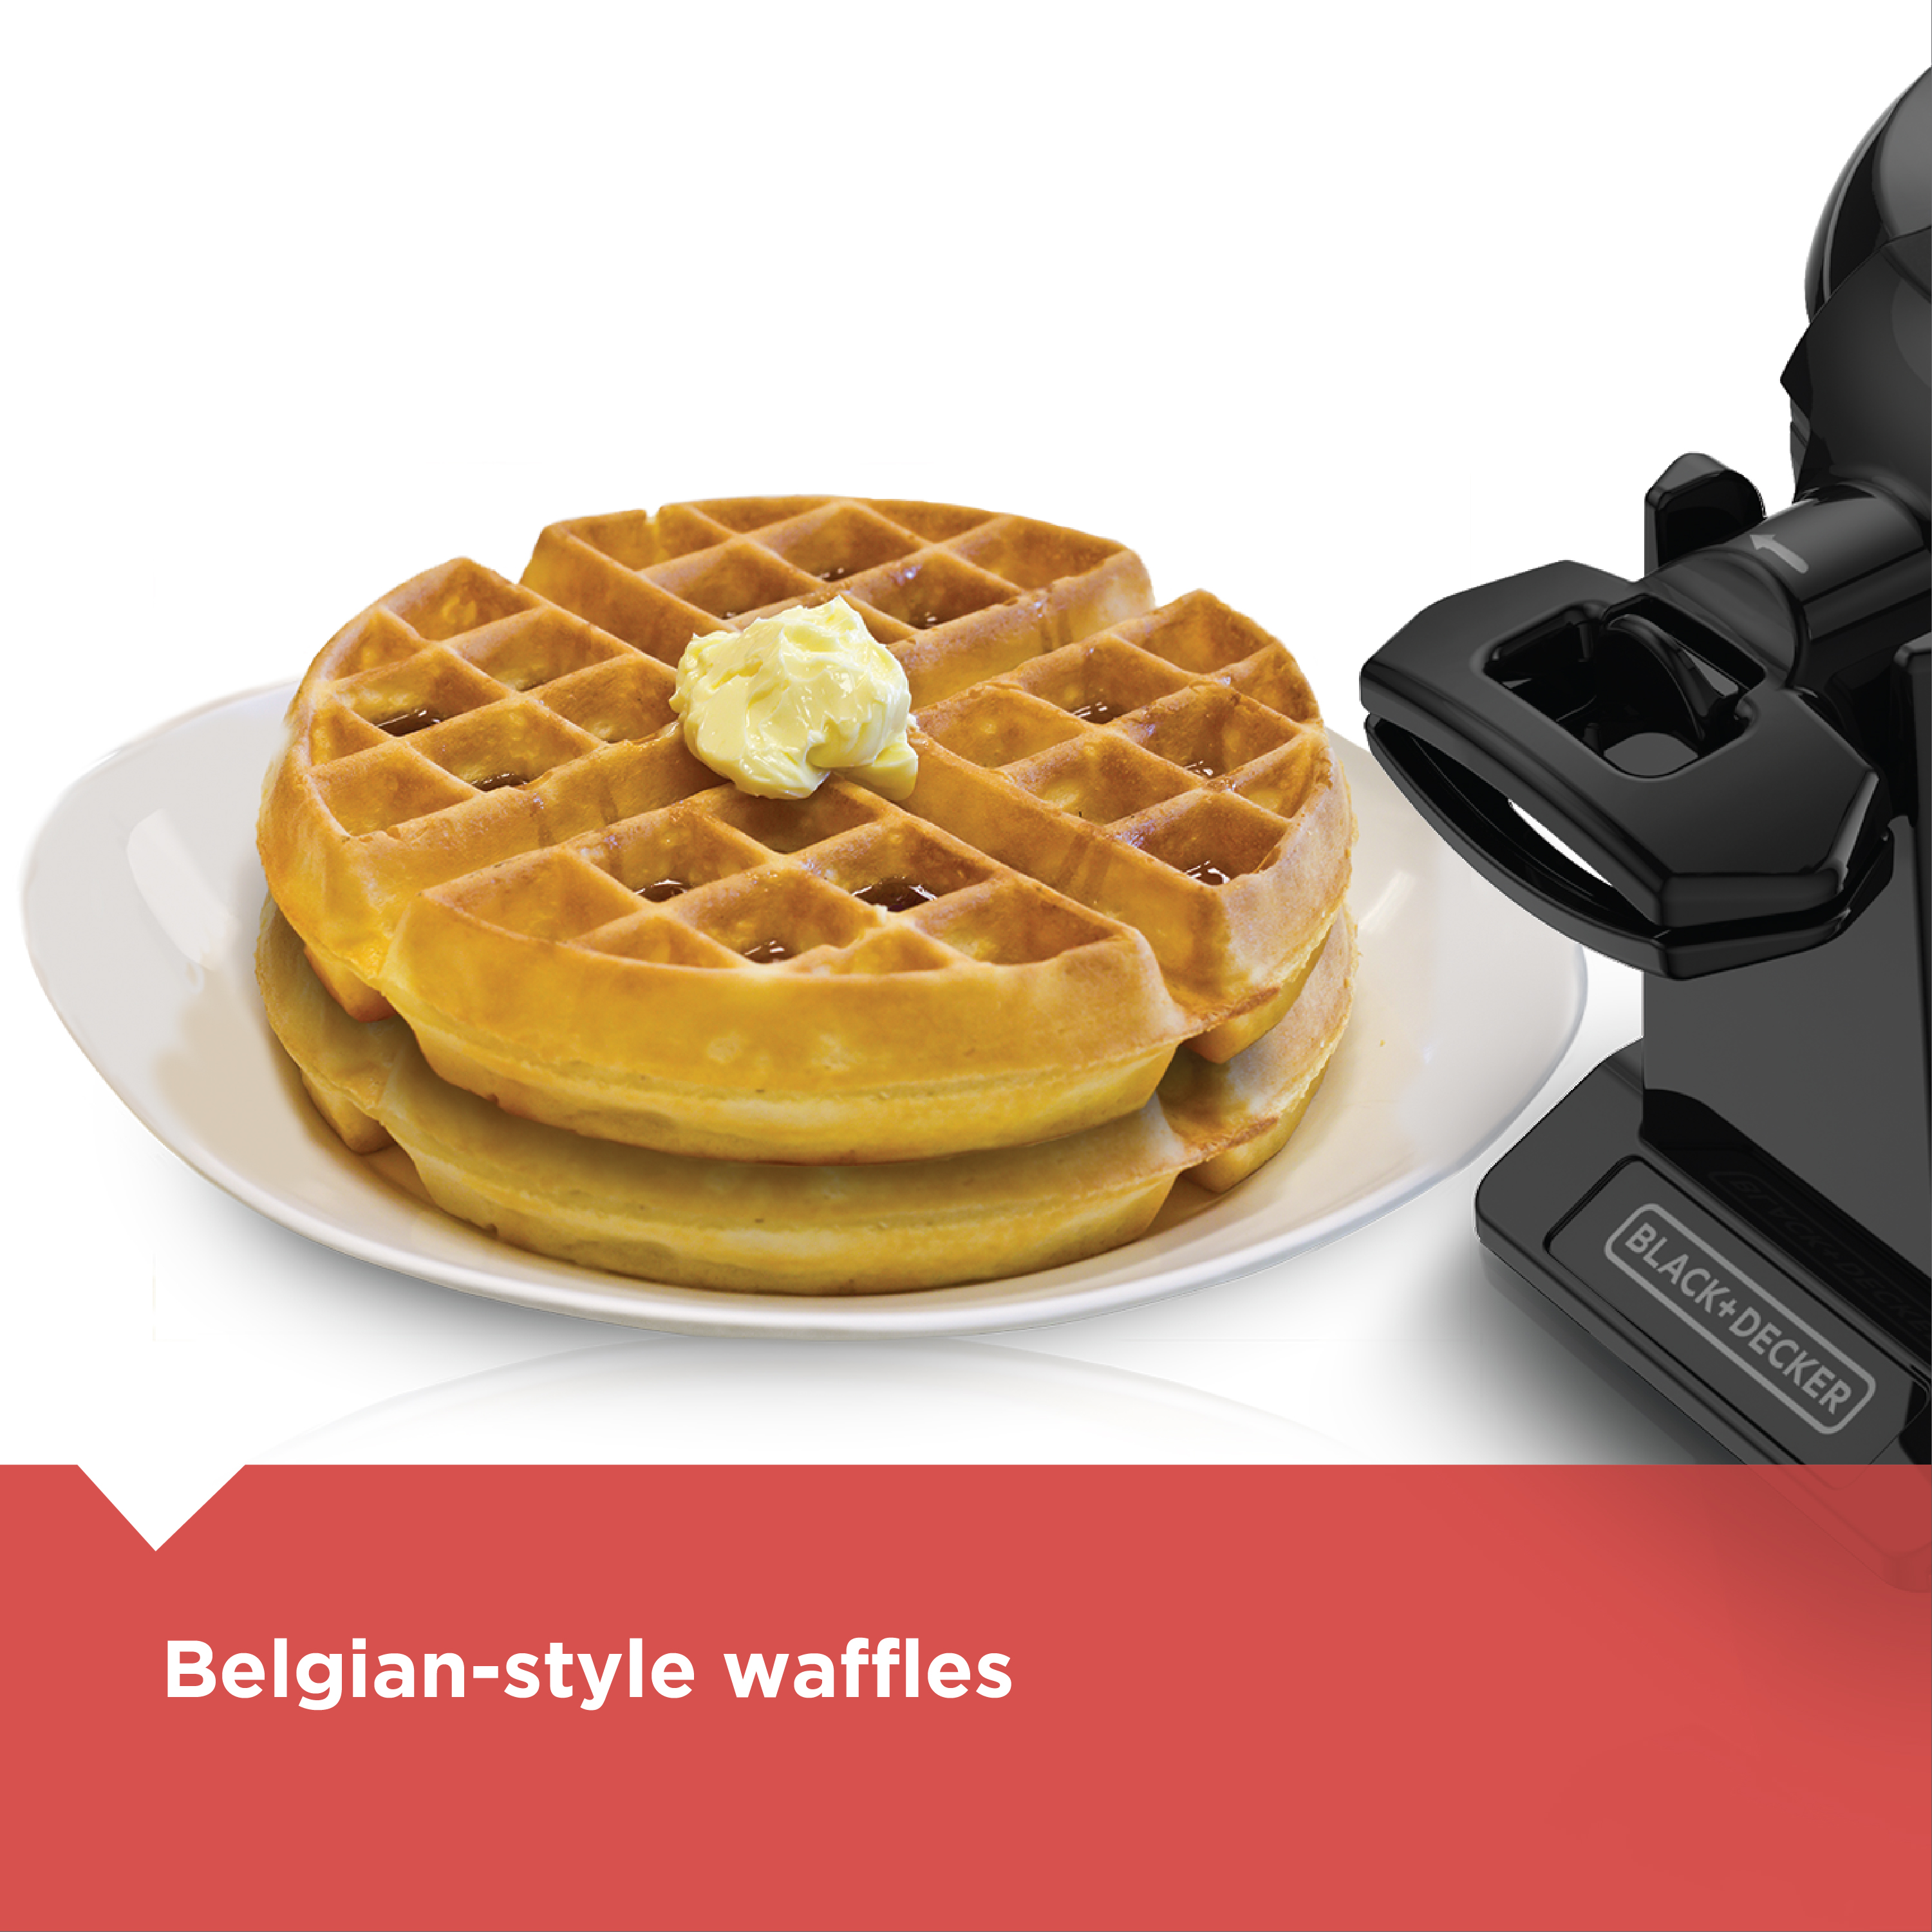 BLACK+DECKER Rotating Waffle Maker with Dual Cooking Plates, Black, WMD200B - image 5 of 9